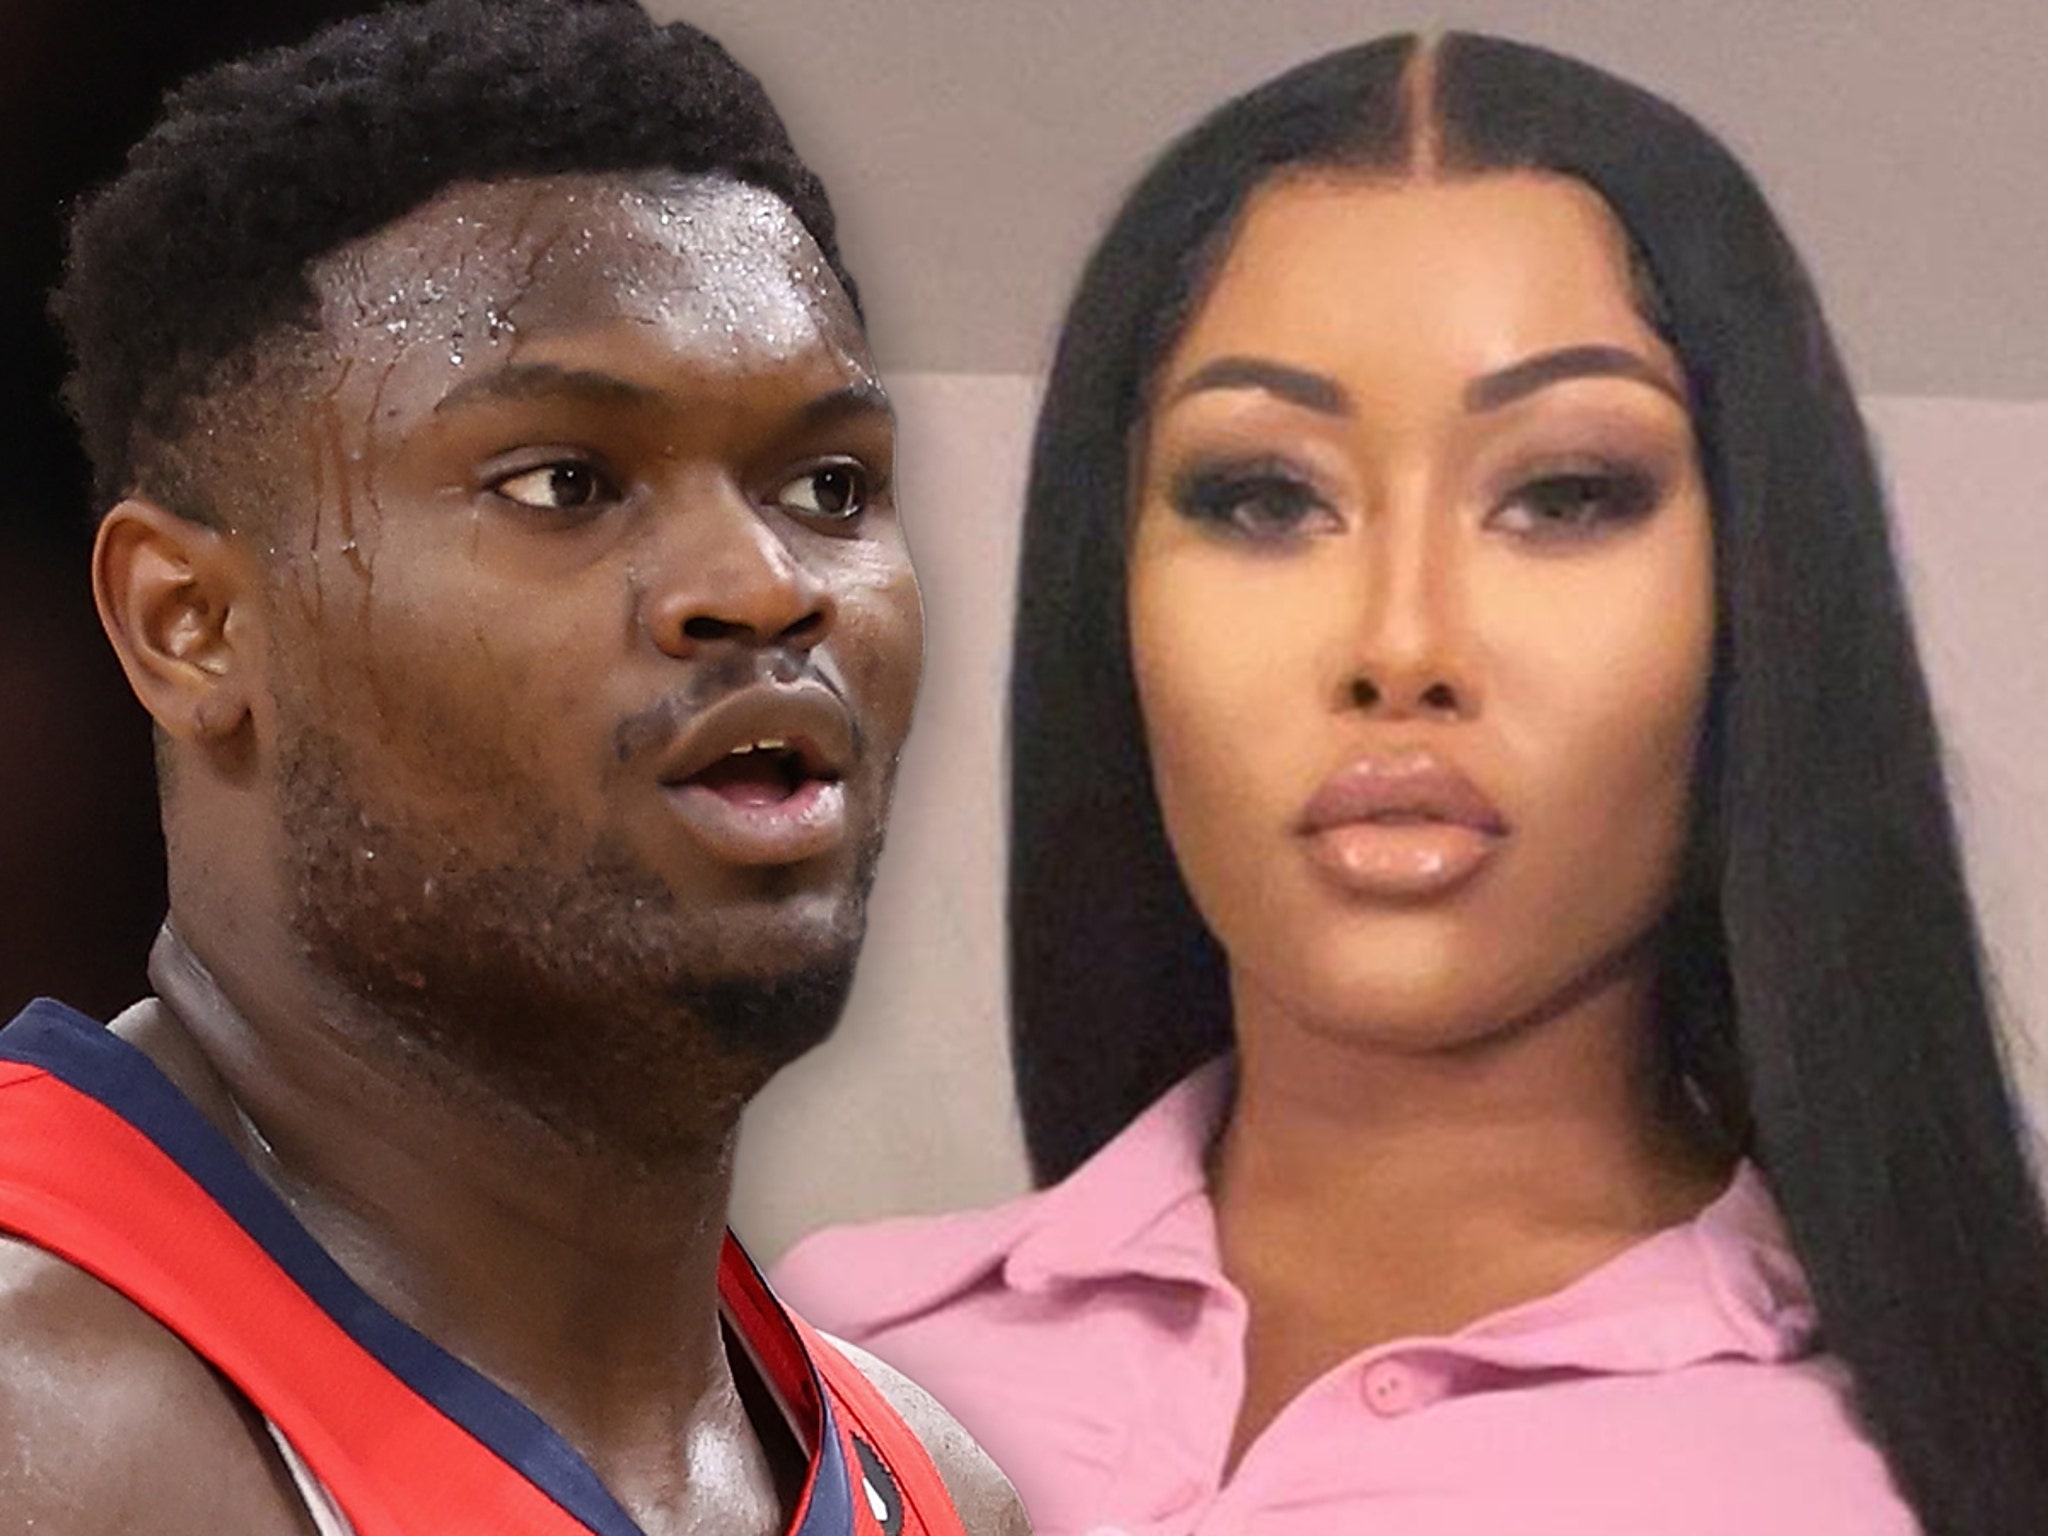 Babyxxx Yare 12 12 - Zion Williamson Called Out By Porn Star, Better Pray I'm Not Pregnant, Too!